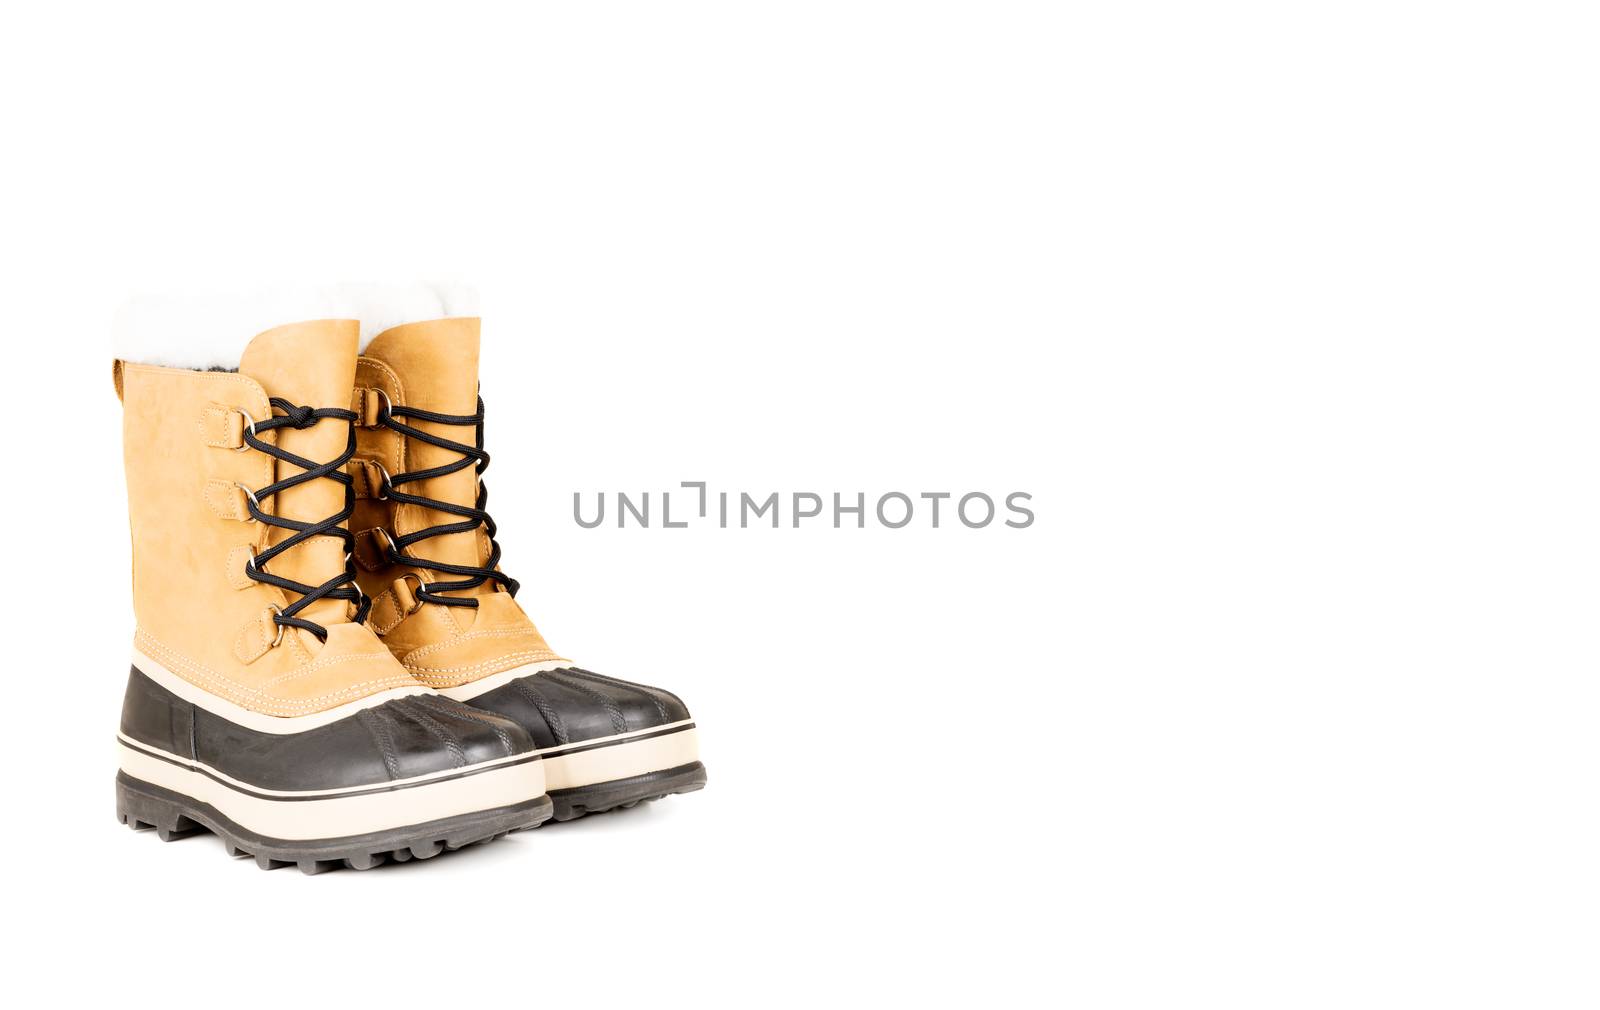 Unisex winter high boots isolated on white with copy space